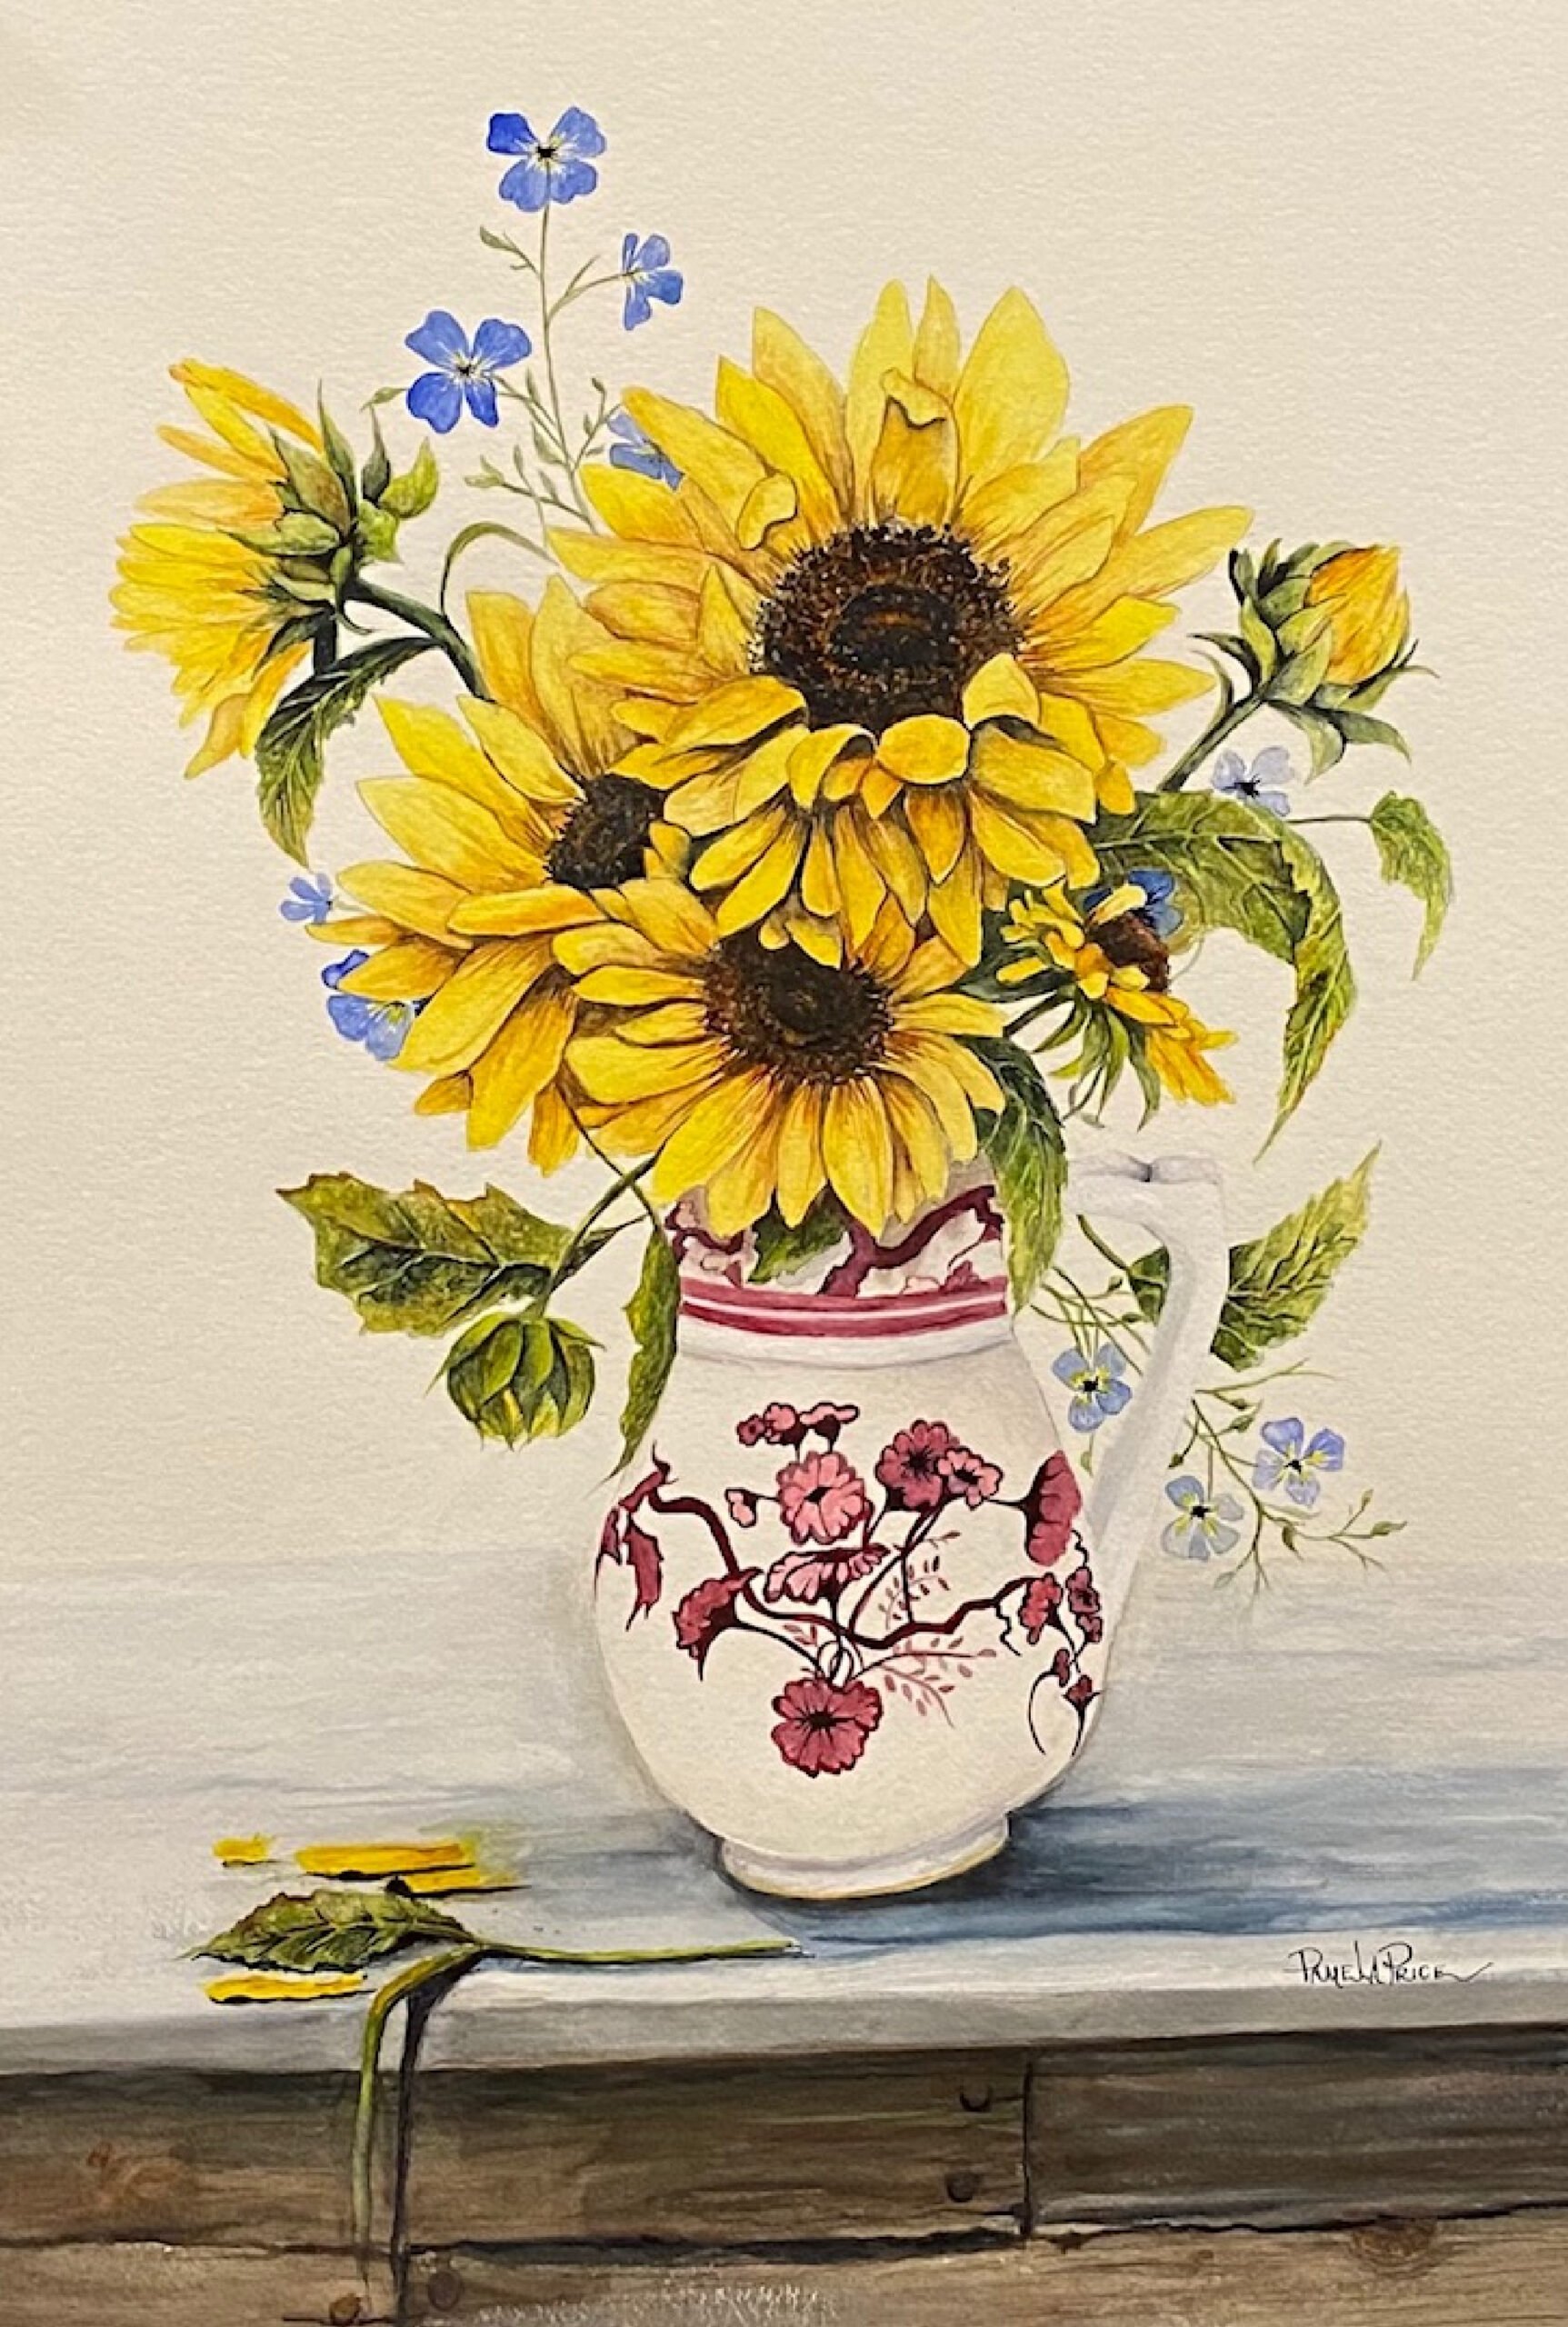 Sunflowers in Red Vase